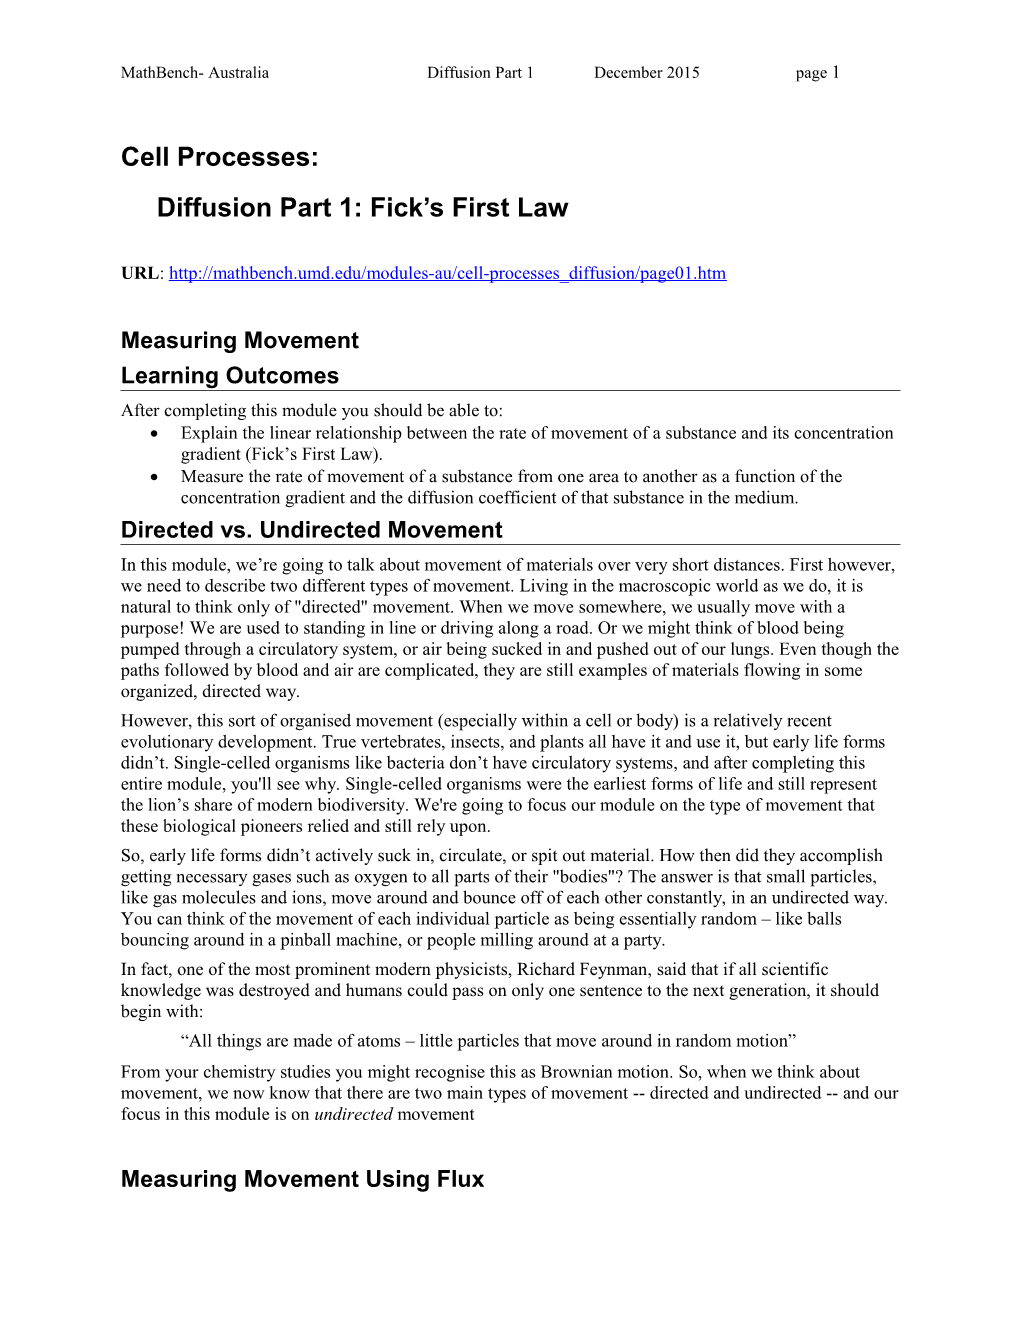 Diffusion Part 1: Fick S First Law